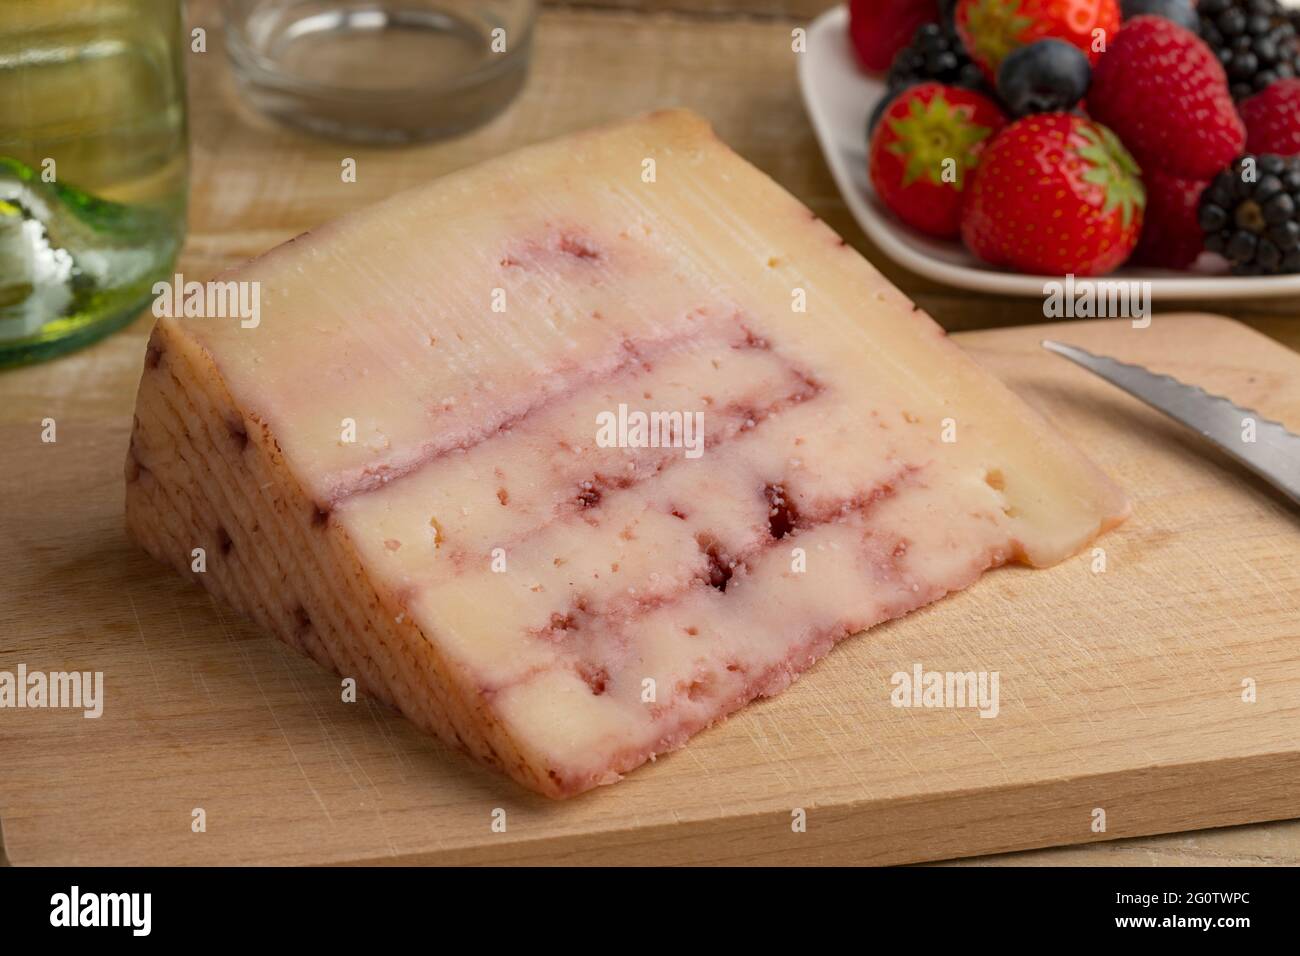 Piece of  Spanish goat cheese with red fruit syrup injected inside,  on a cutting board and fresh fruit in the background Stock Photo